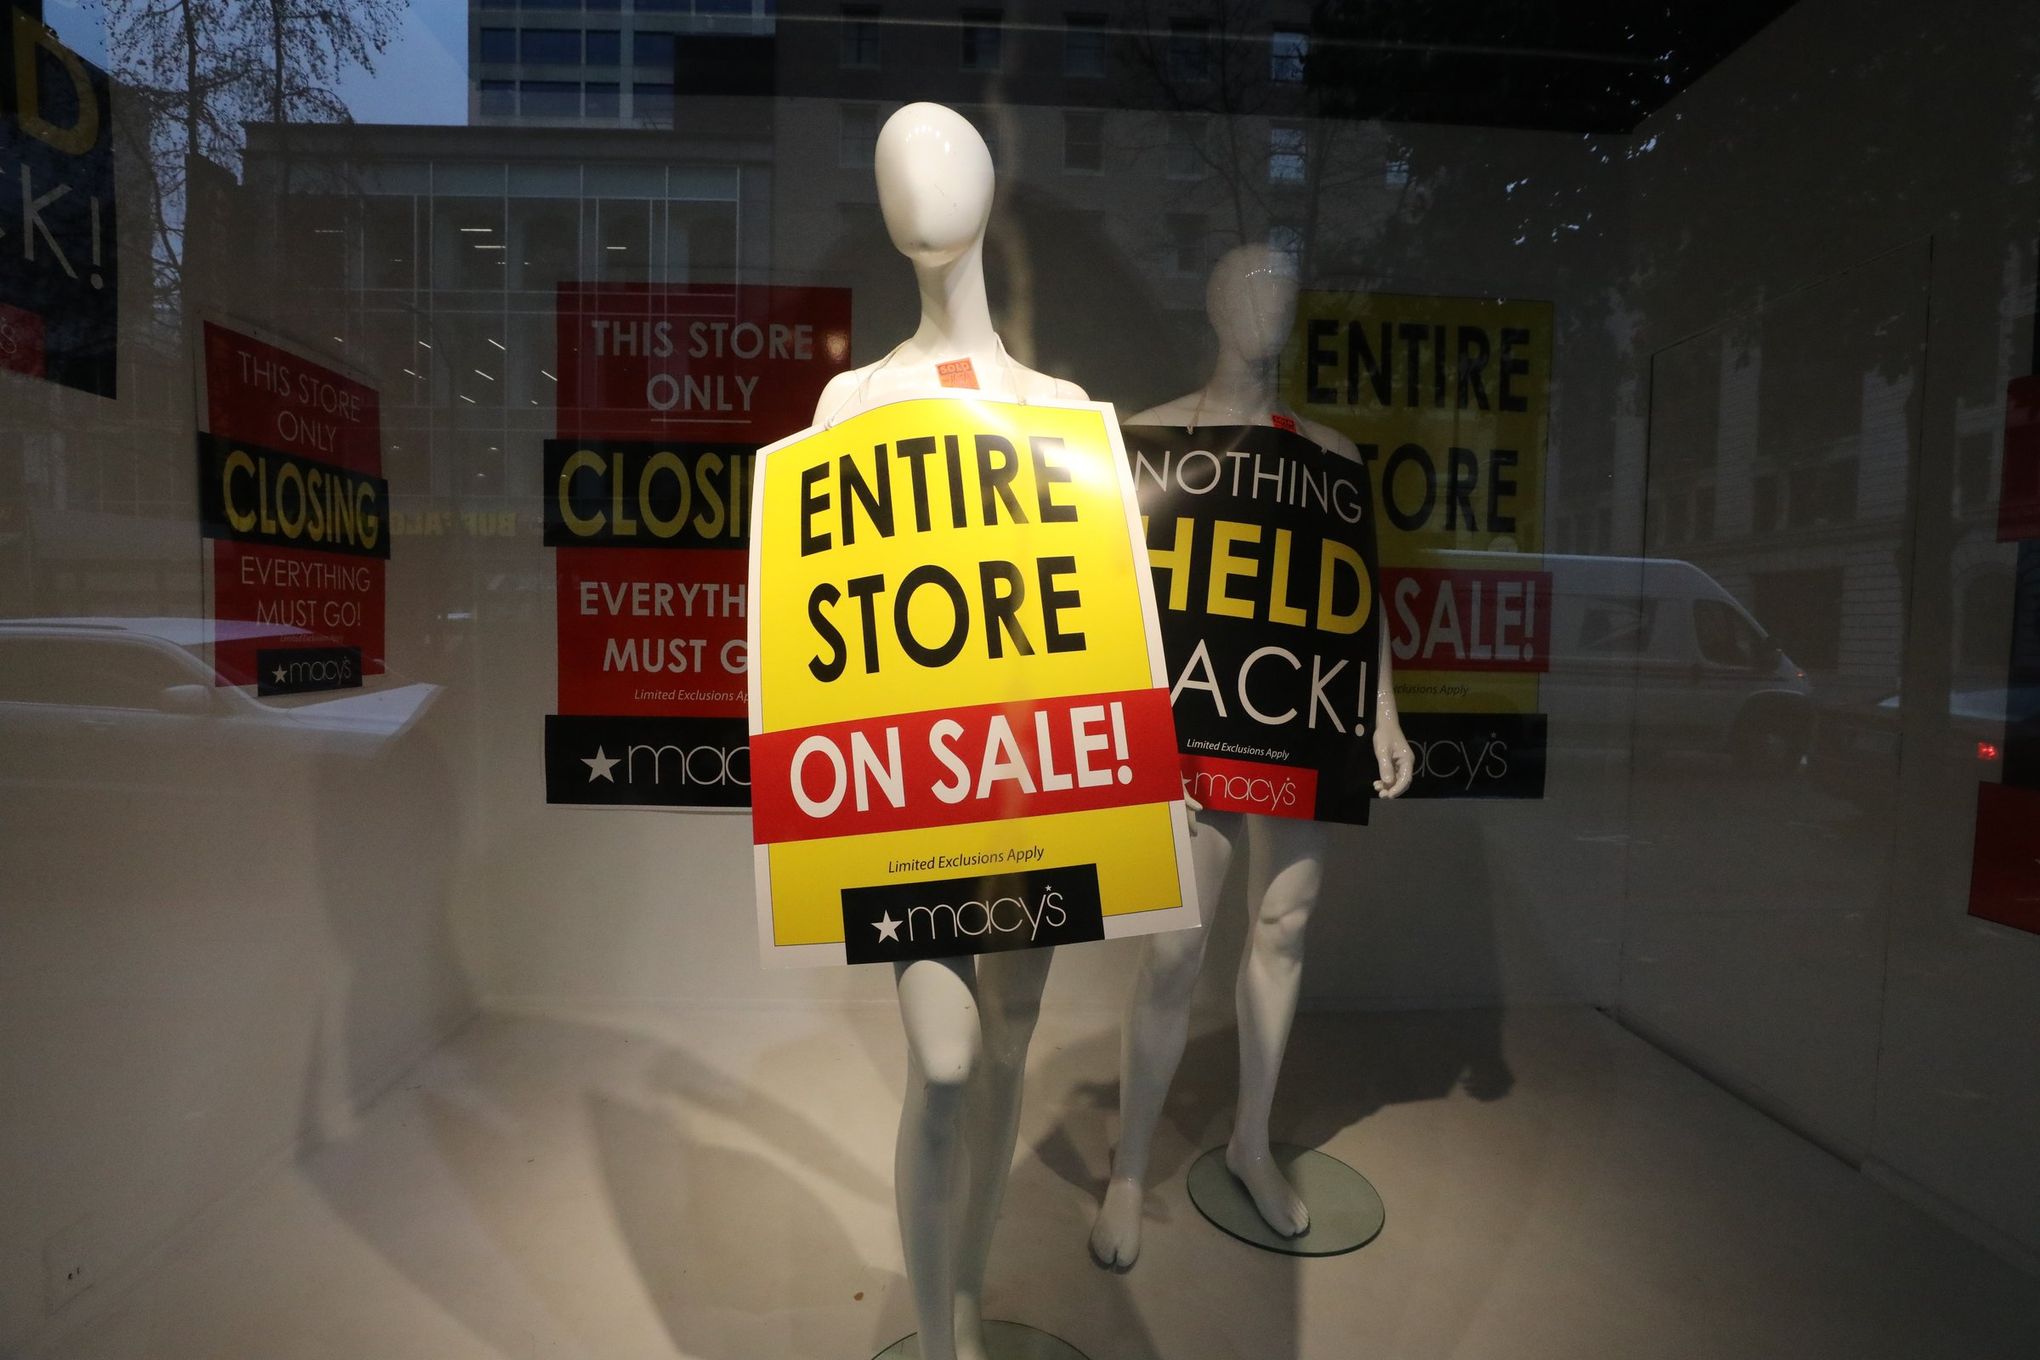 Why should I bother to come downtown?': Macy's closure highlights